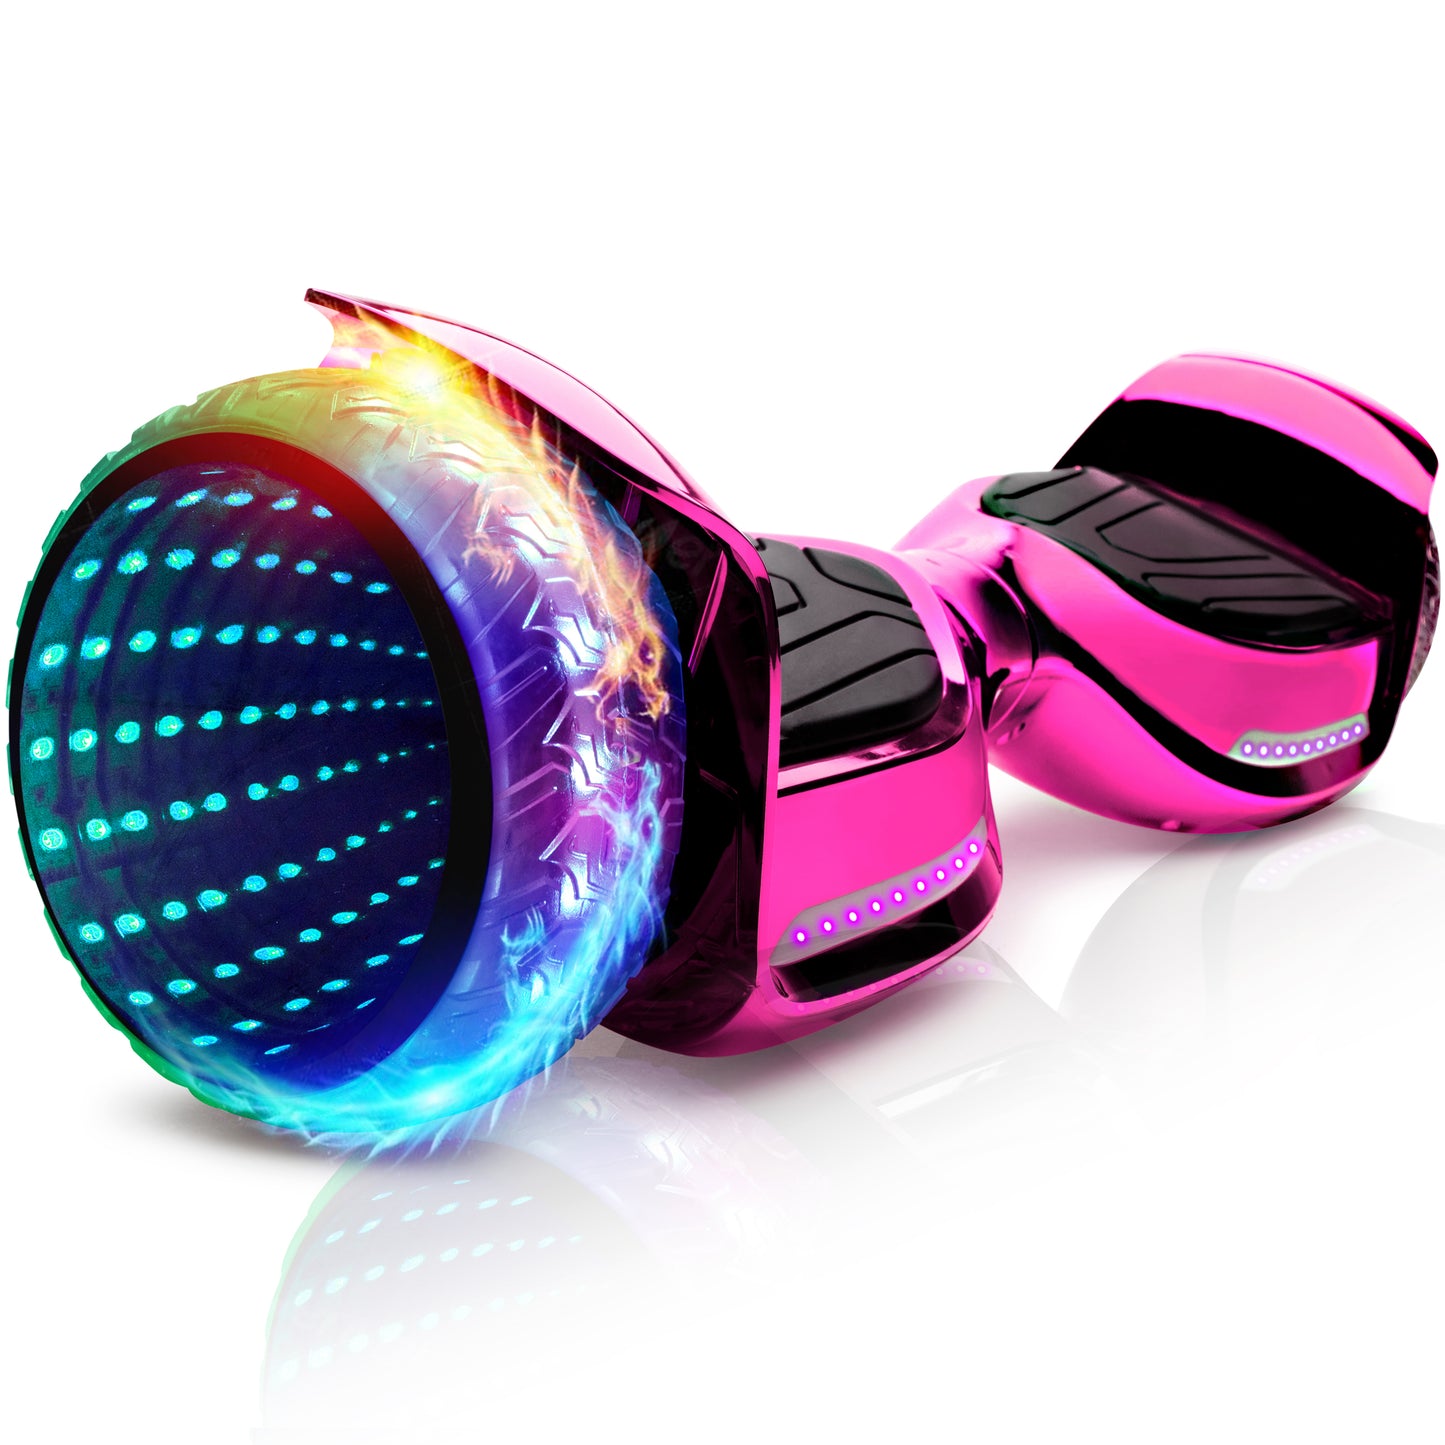 Hoverboard for Kids - 6.5'' Wheels Electric Self Balancing Scooter with Bluetooth Speaker and LED Lights - UL Safety Certified